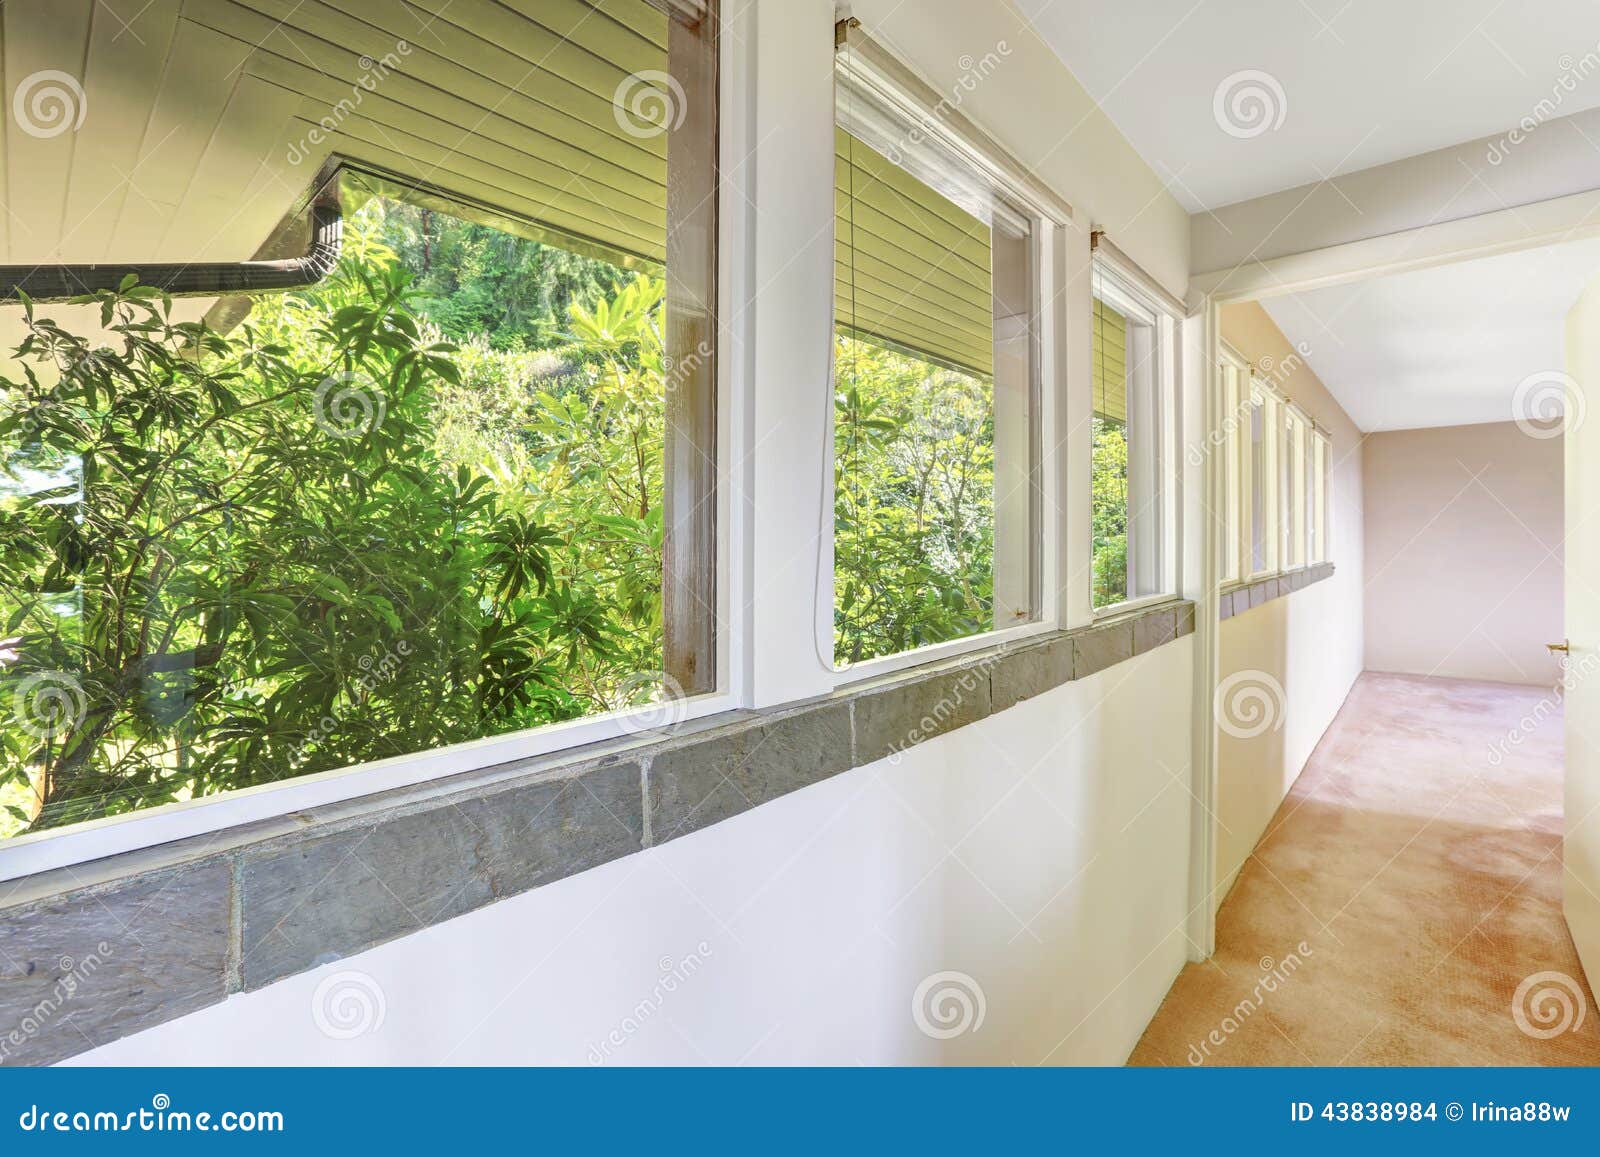 Hallway with Windows in Empty House Stock Photo - Image of indoor, house:  43838984